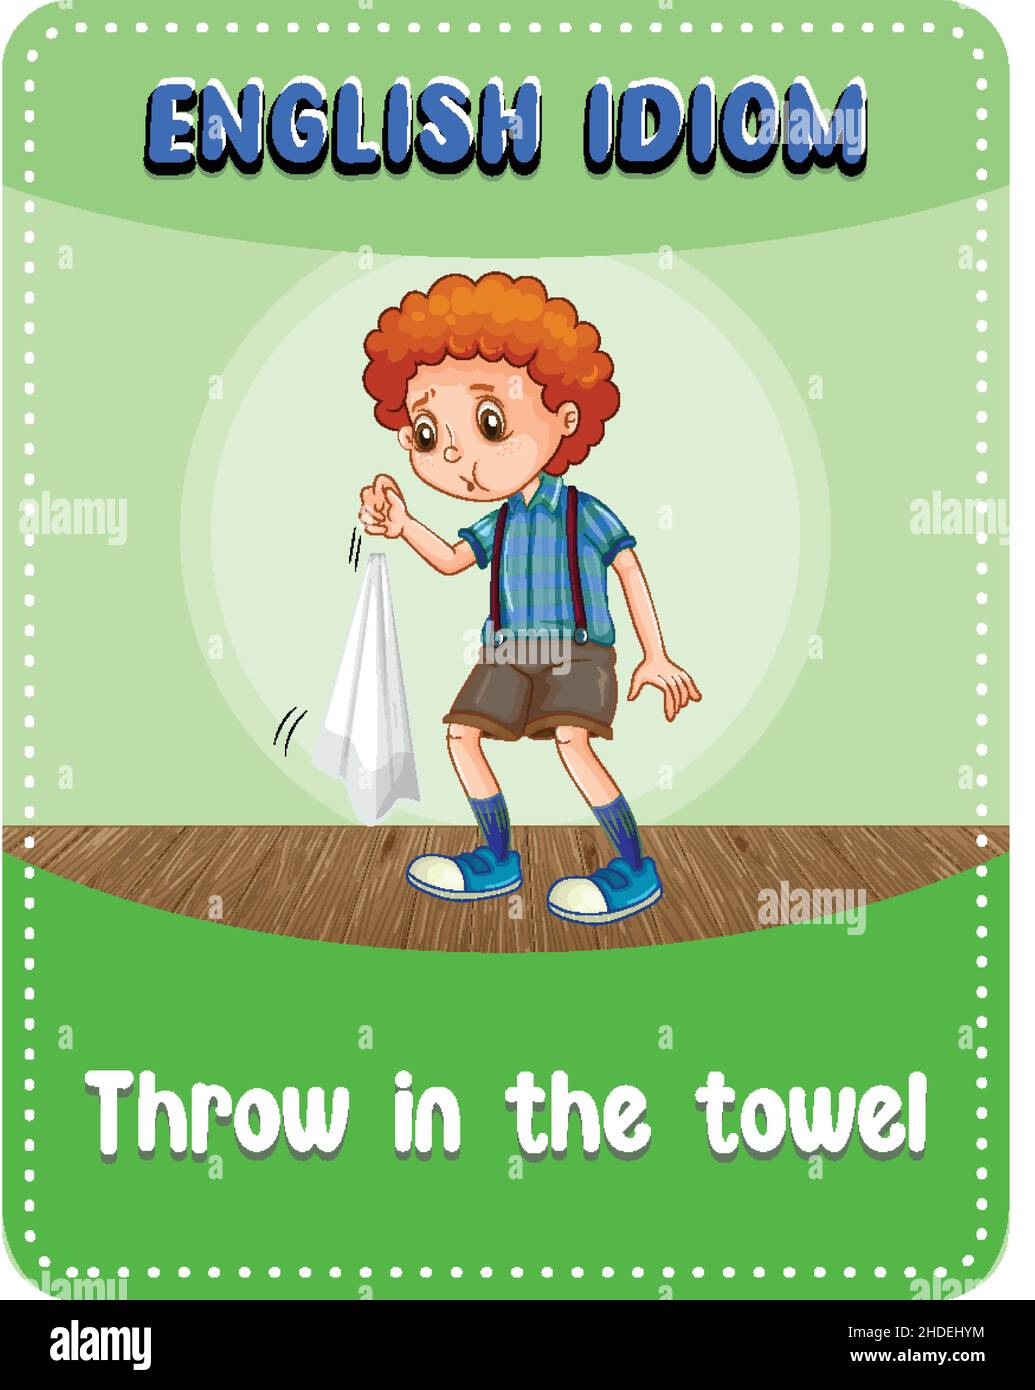 English idiom with picture description for throw in the towel illustration Stock Vector